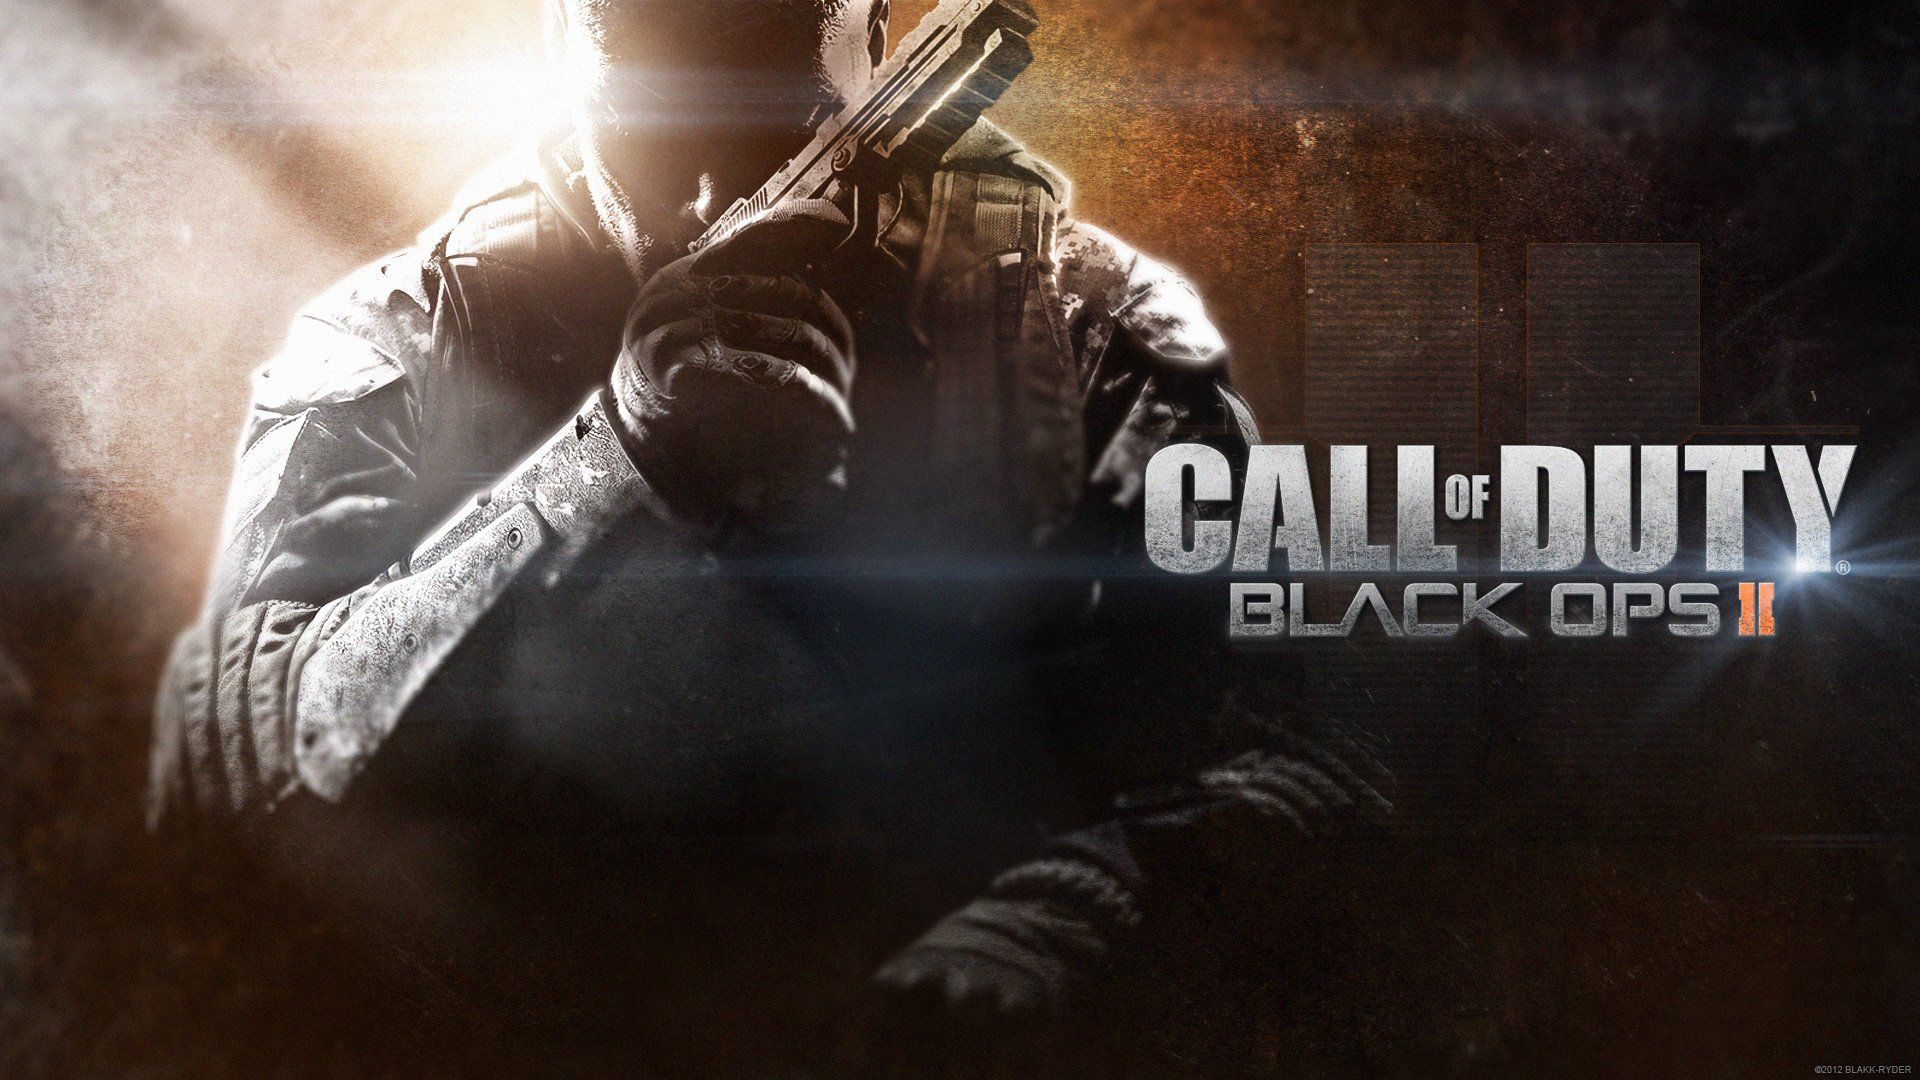 Download Call of Duty Black Ops 2 Game Full Version